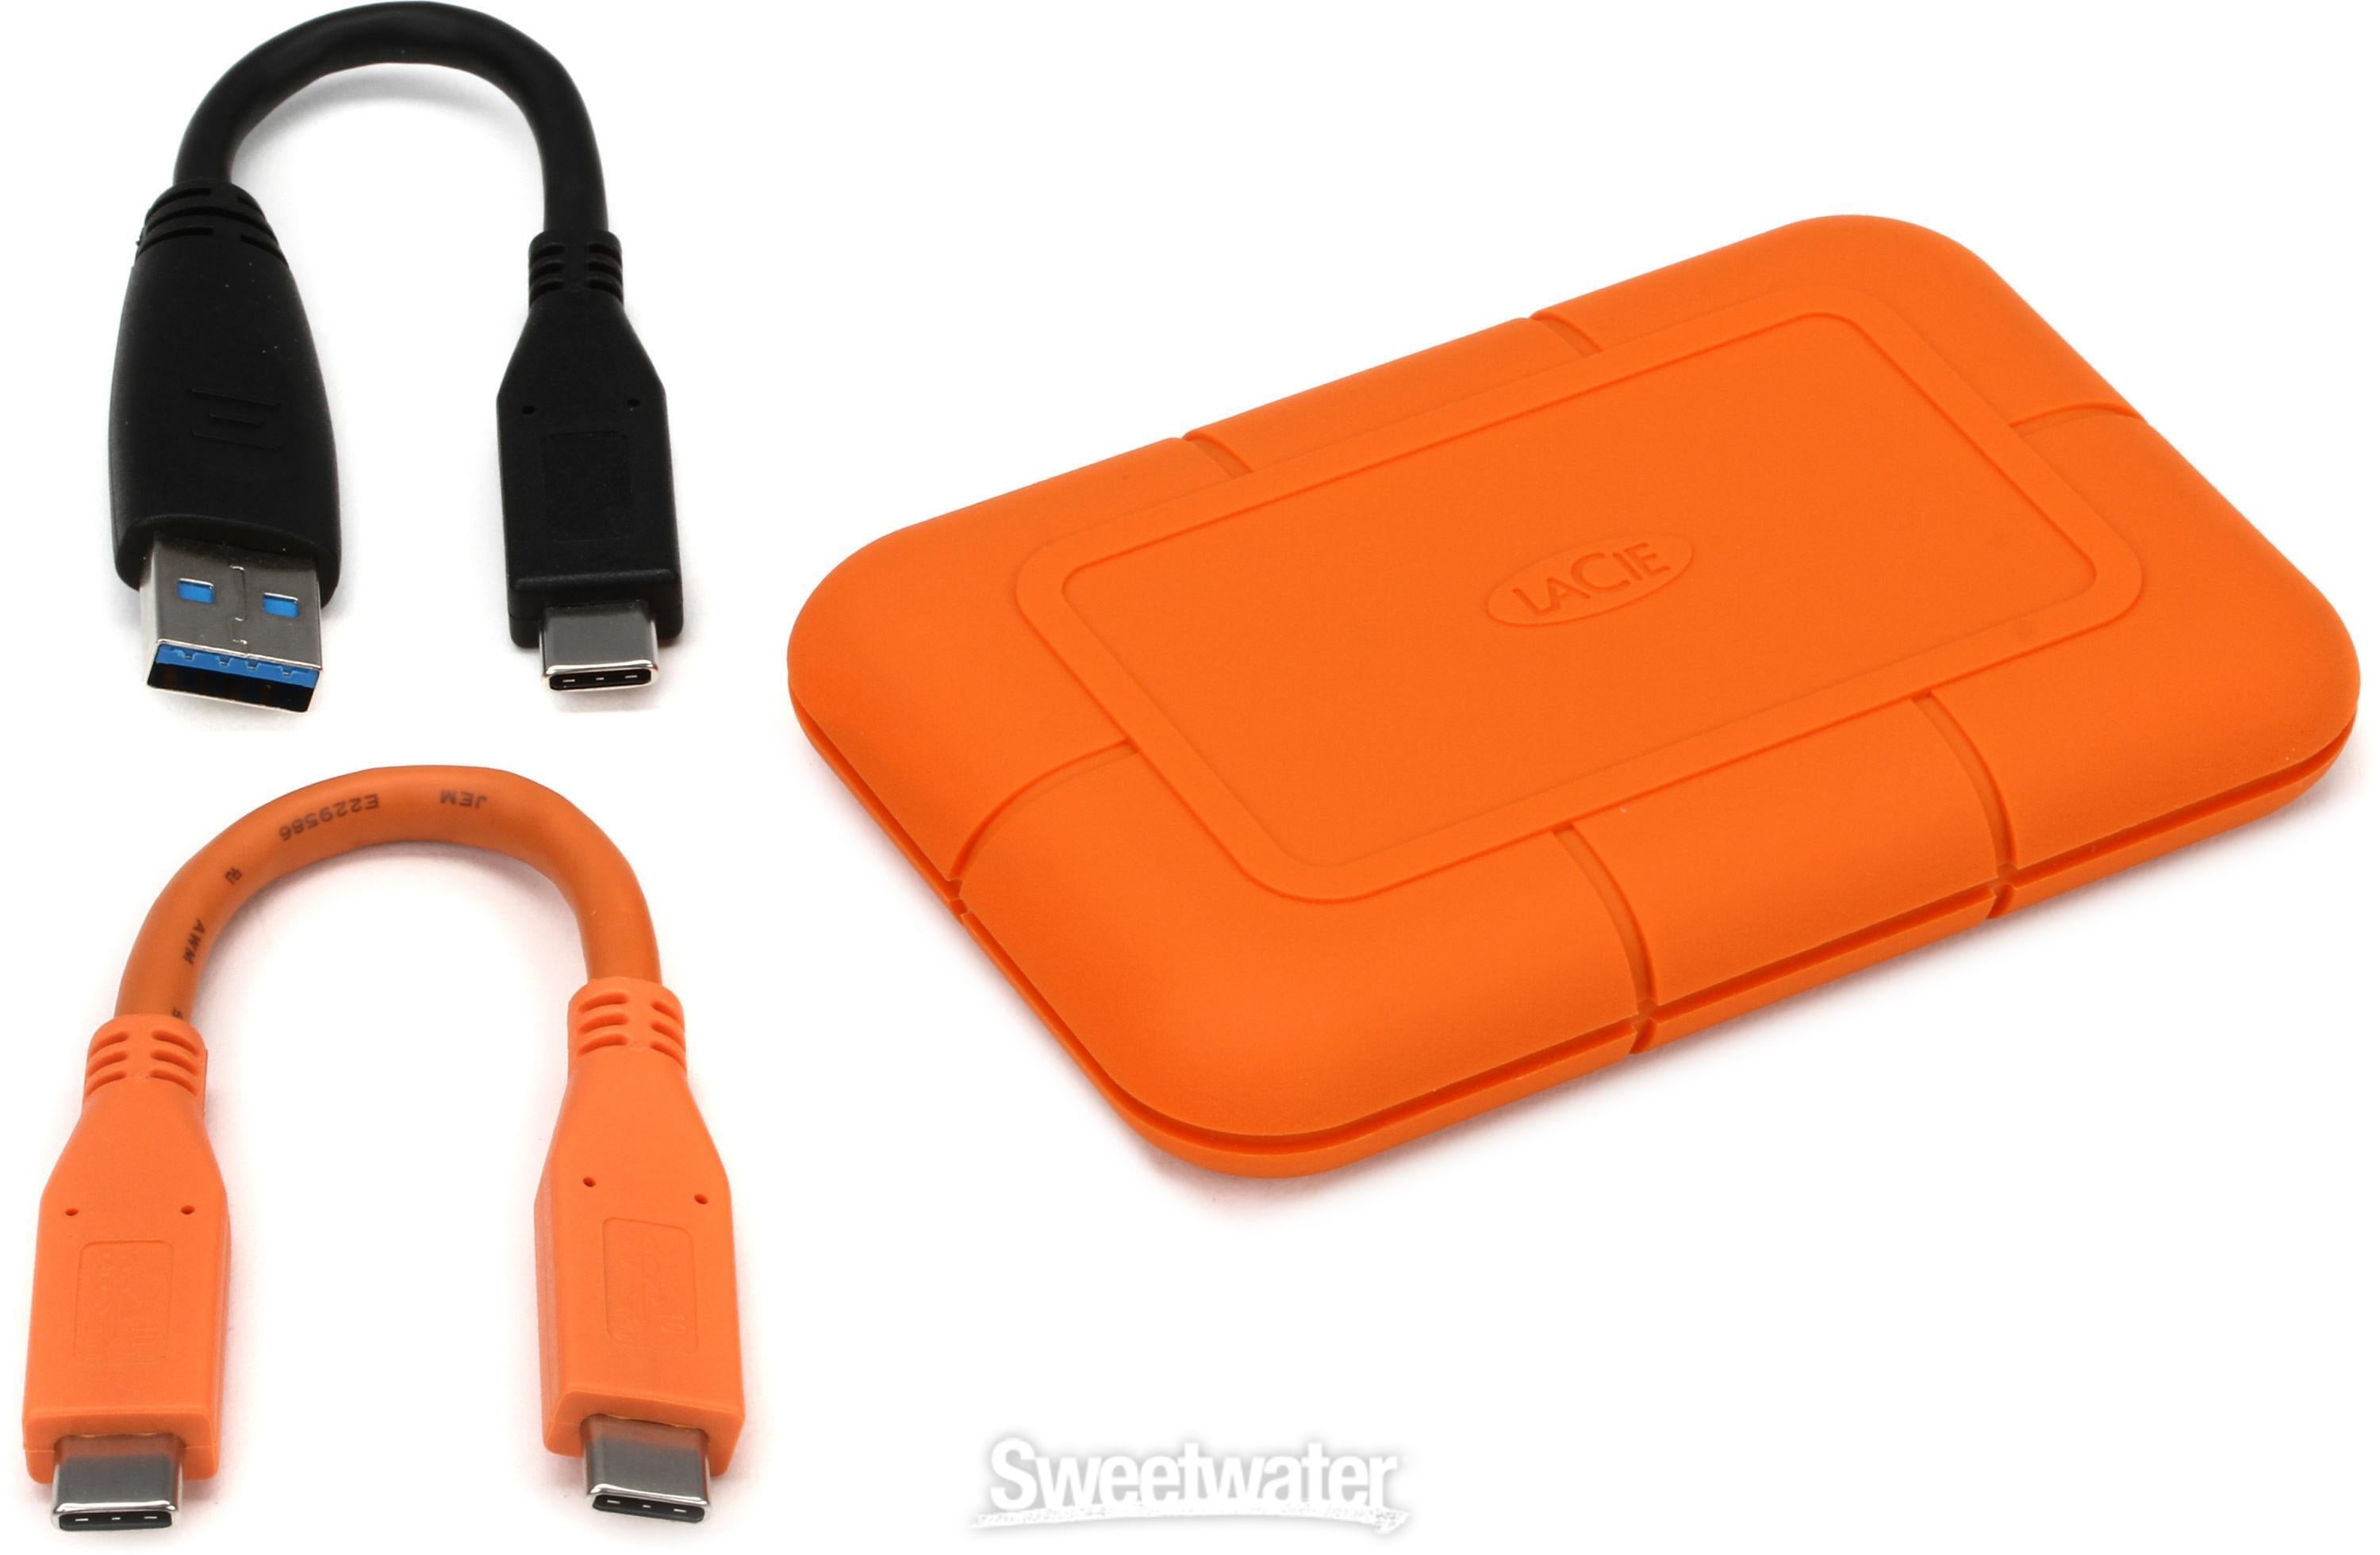 LaCie Rugged Mini SSD review: Eye-catching design and performance